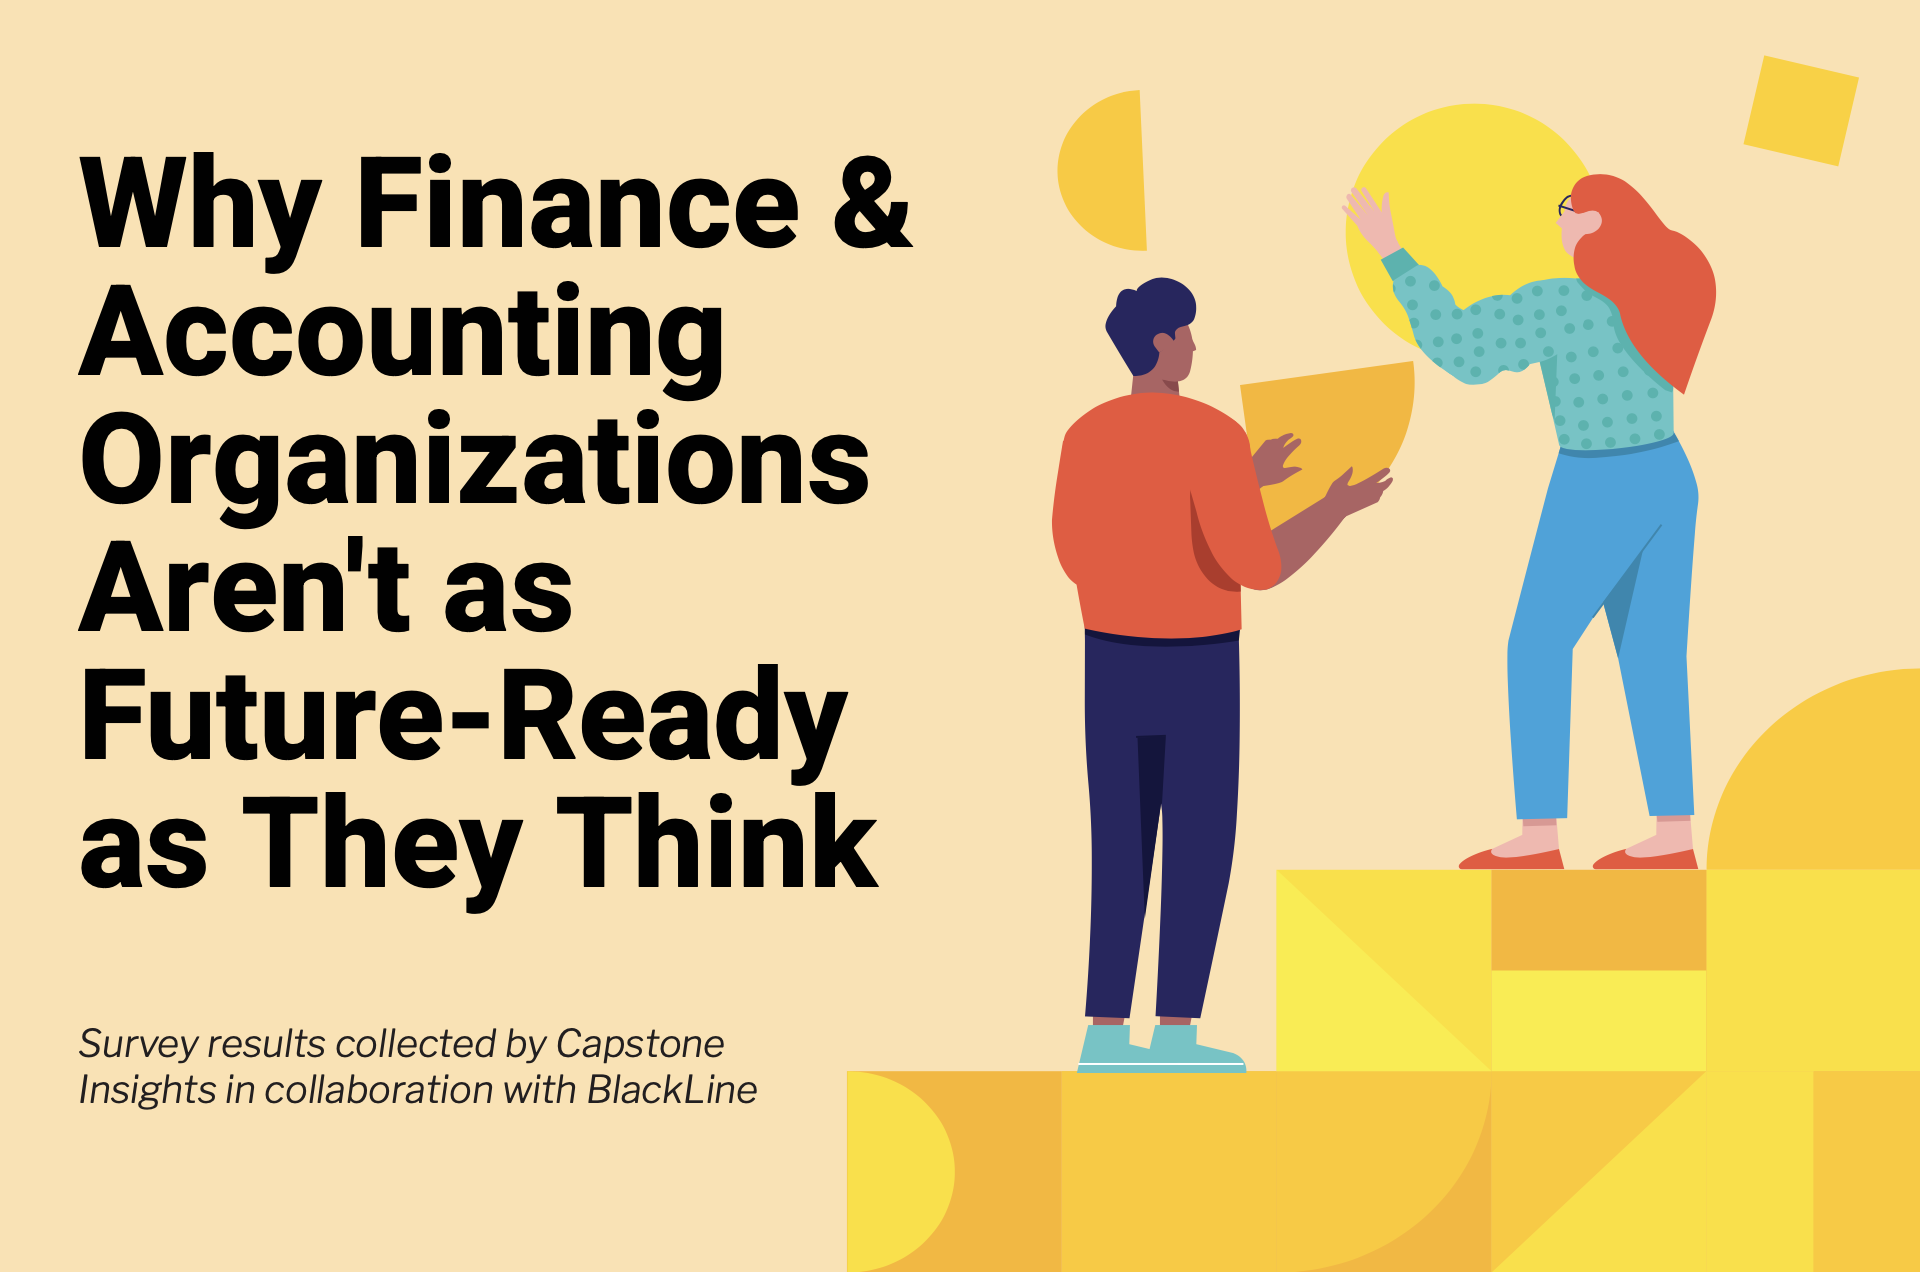 Future Readiness for Finance & Accounting Organizations